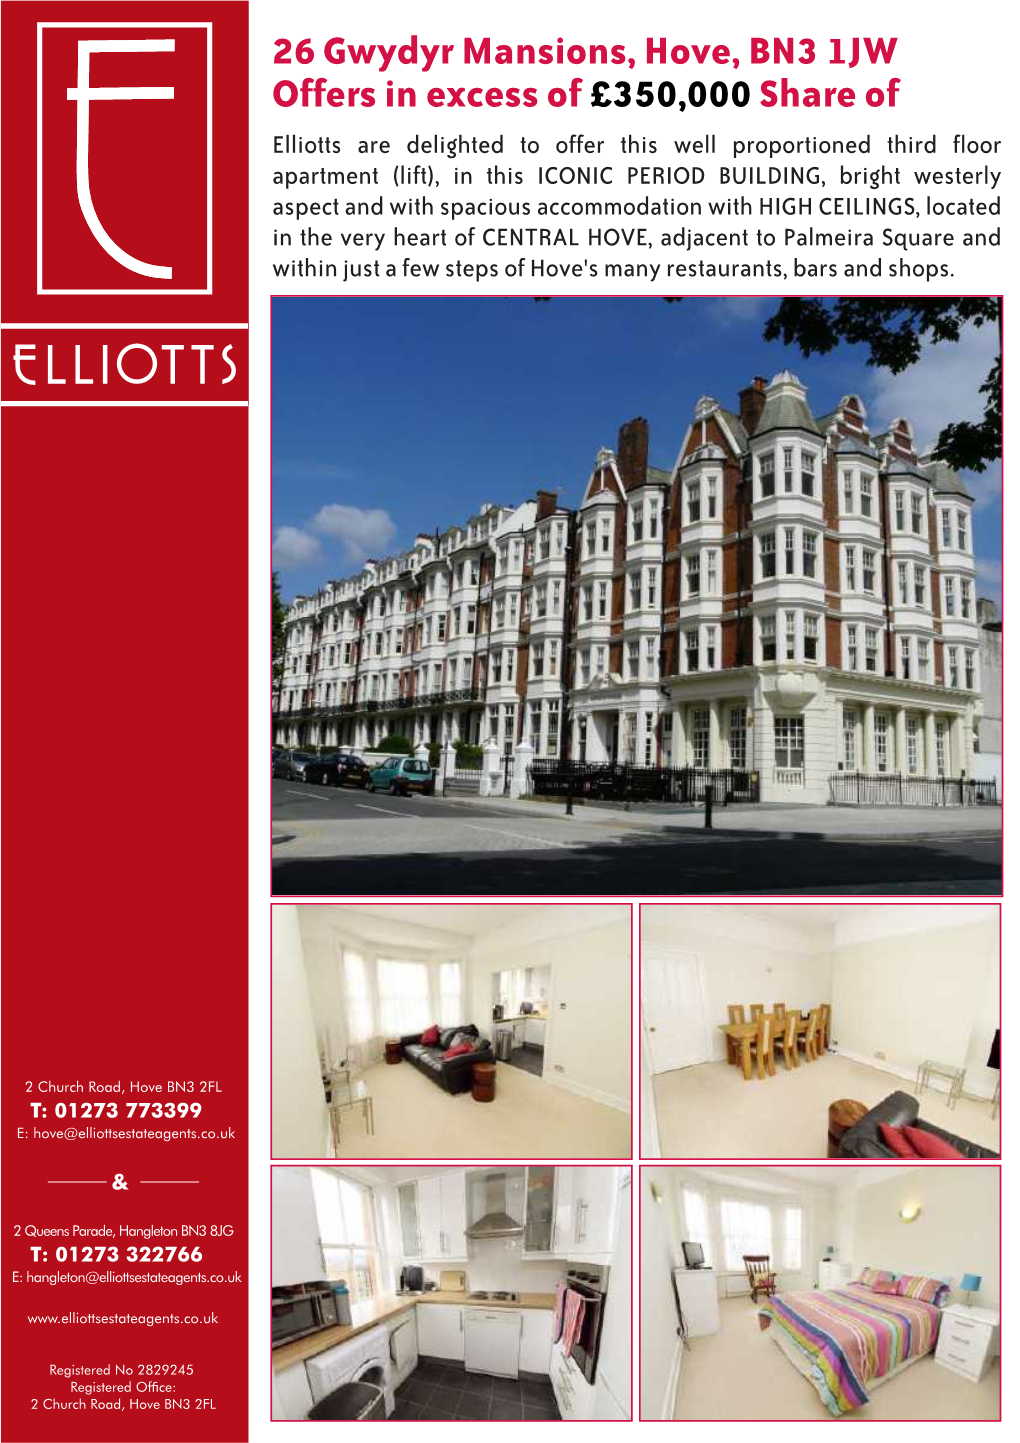 26 Gwydyr Mansions, Hove, BN3 1JW Offers in Excess Of£350,000Share Of